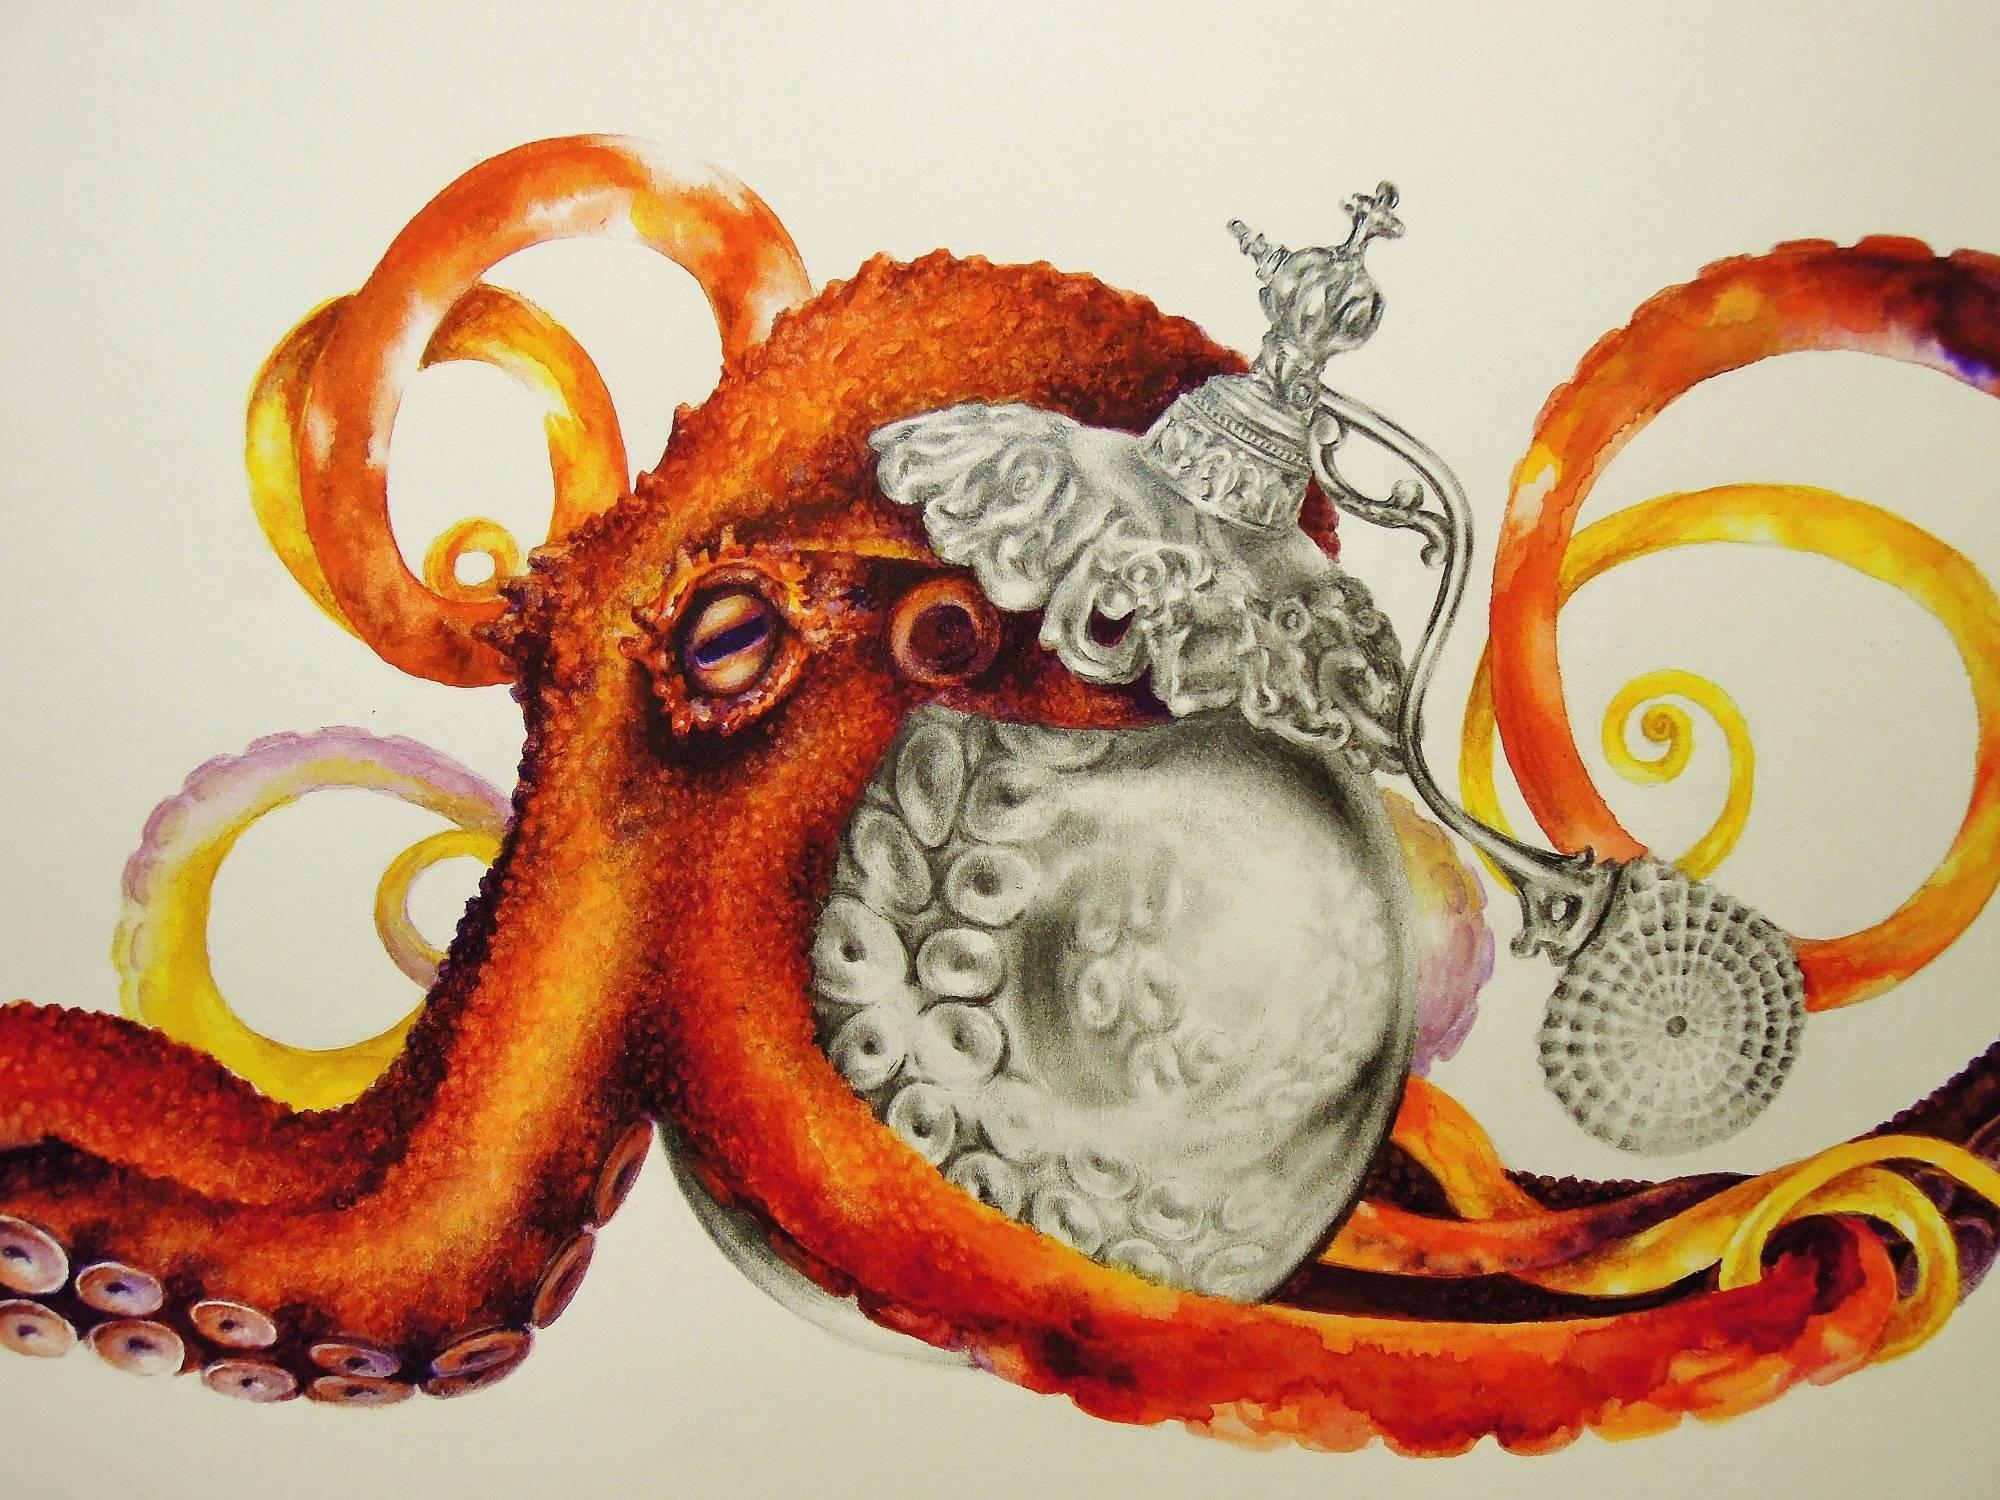 Perfume No. One, Drawing of Orange, Red Octopus and Perfume Bottle on White - Art by Francine Fox